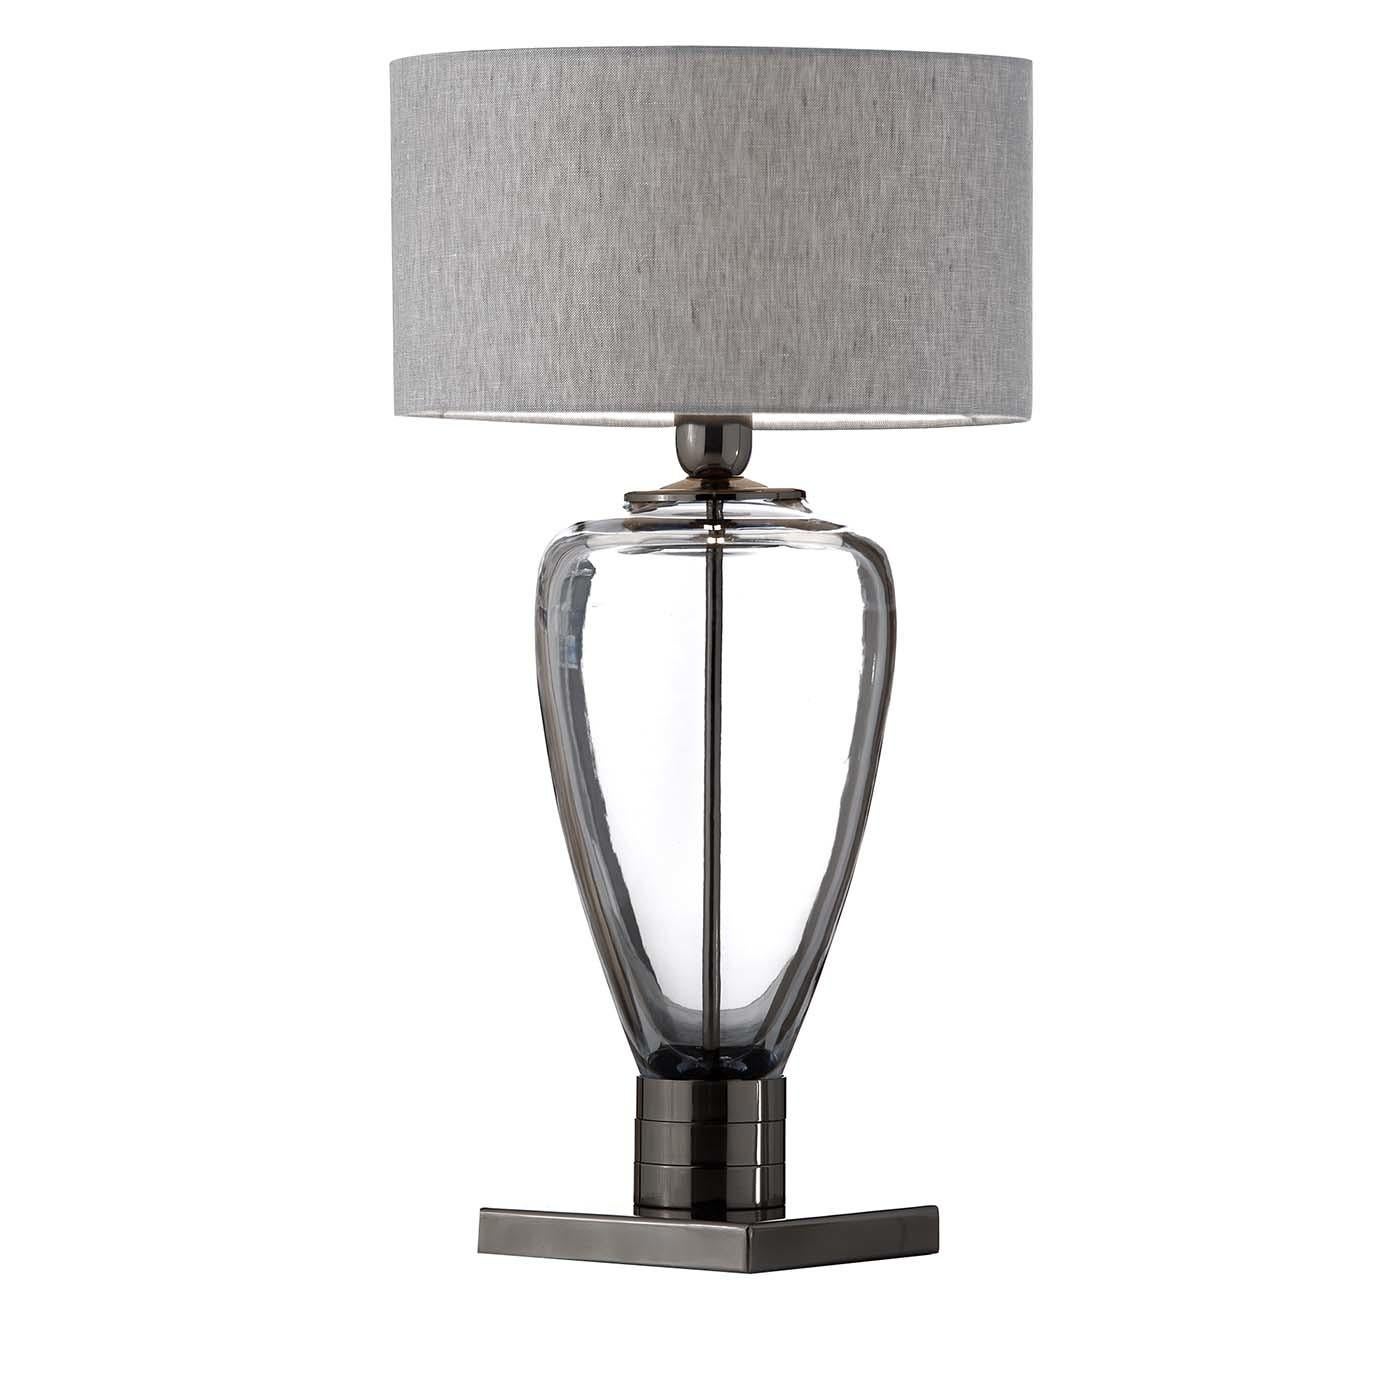 A precious addition to a contemporary decor, this table lamp can be paired alongside an identical one flanking a mirror in an entryway or used to add extra light to a living room or private study. The structure was crafted entirely of 24 lead